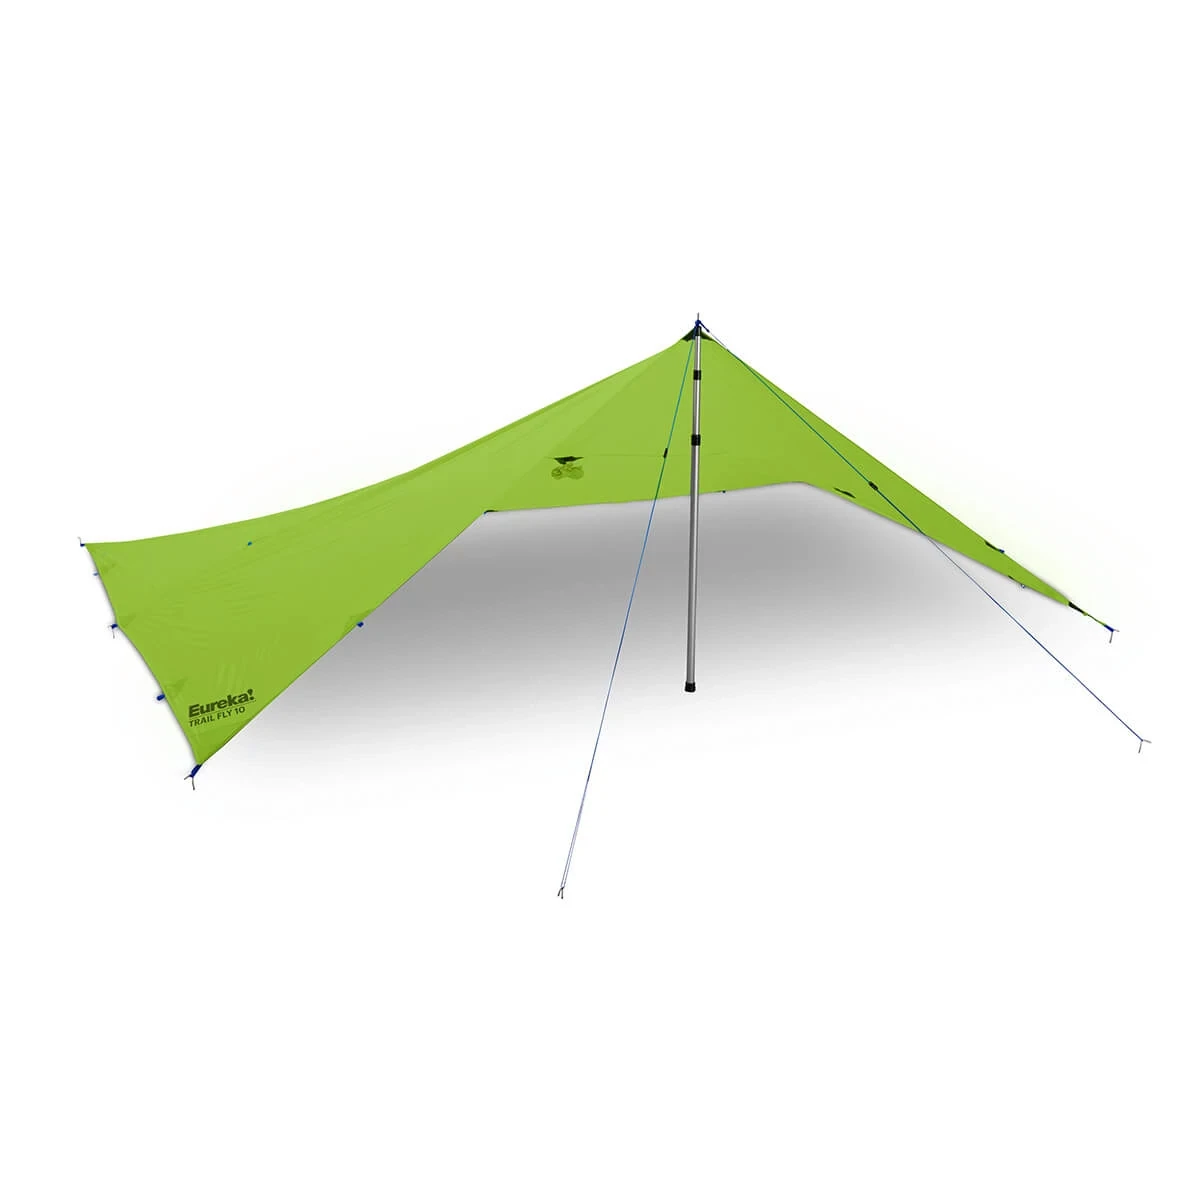 Trail Fly 10 pitch configuration option for shelter. Pole sold separately.